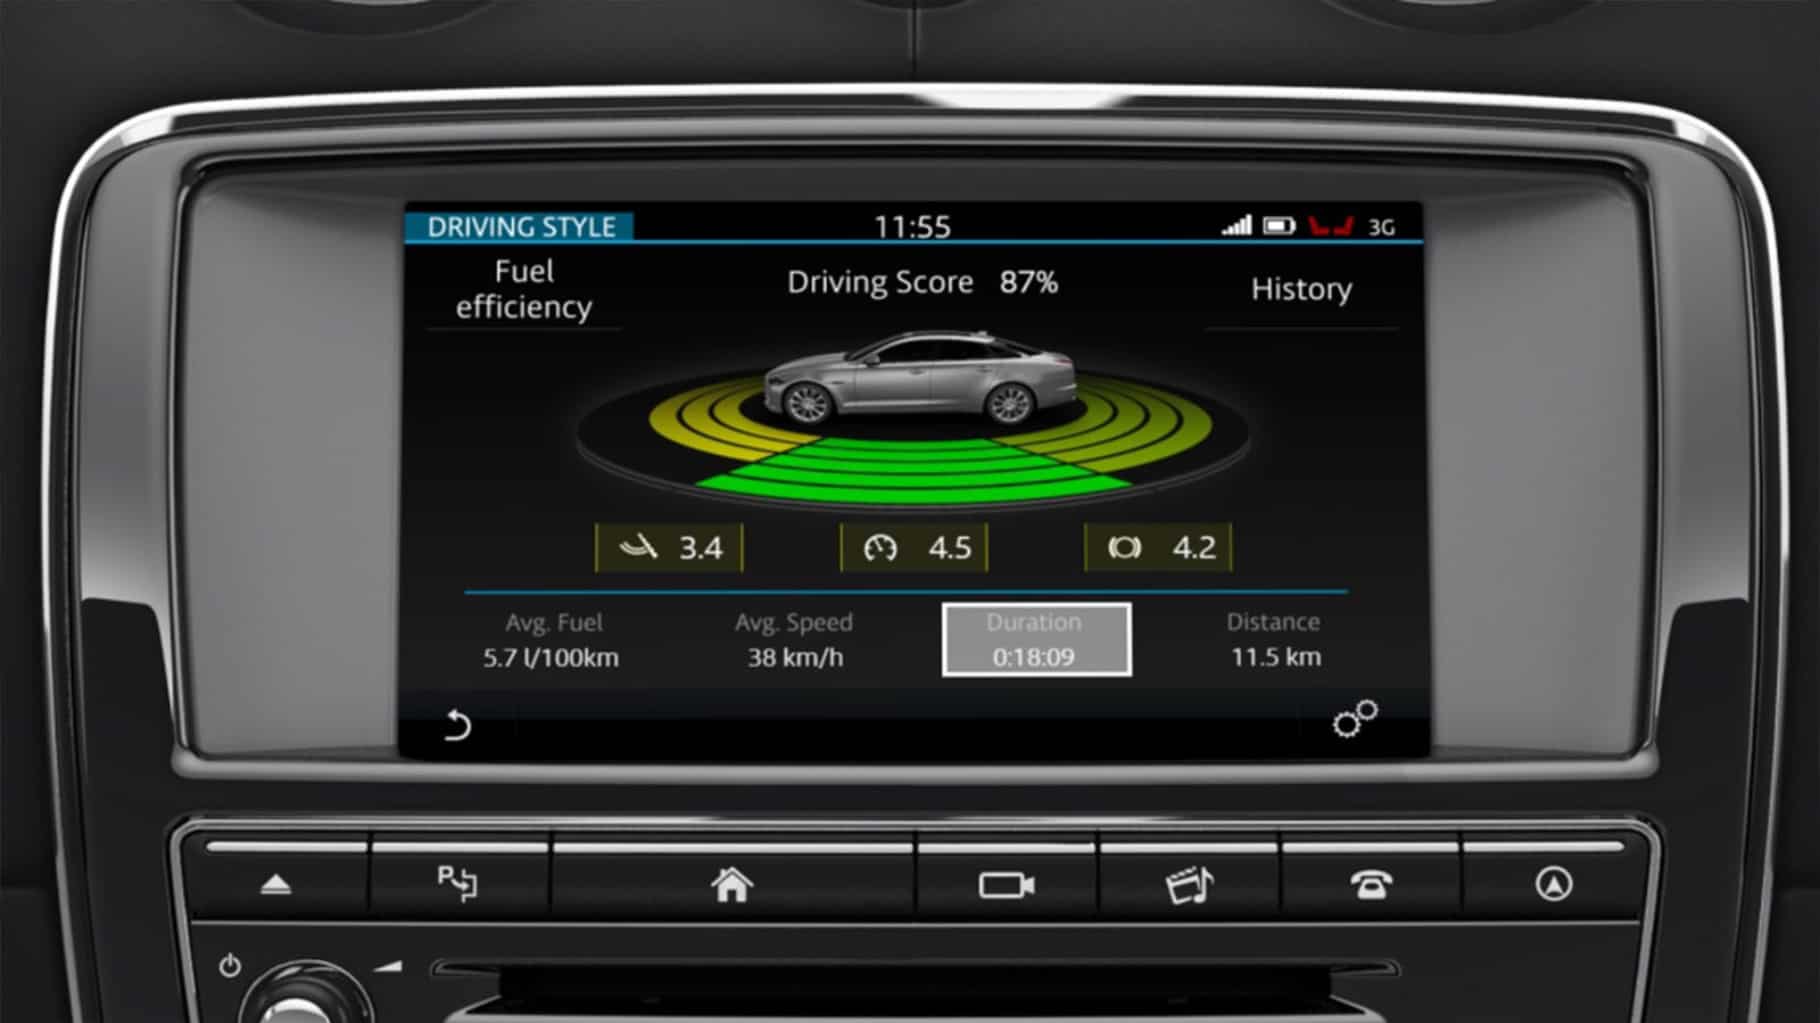 Jaguar InControl Touch Pro: Eco Data on the infotainment Touchscreen.